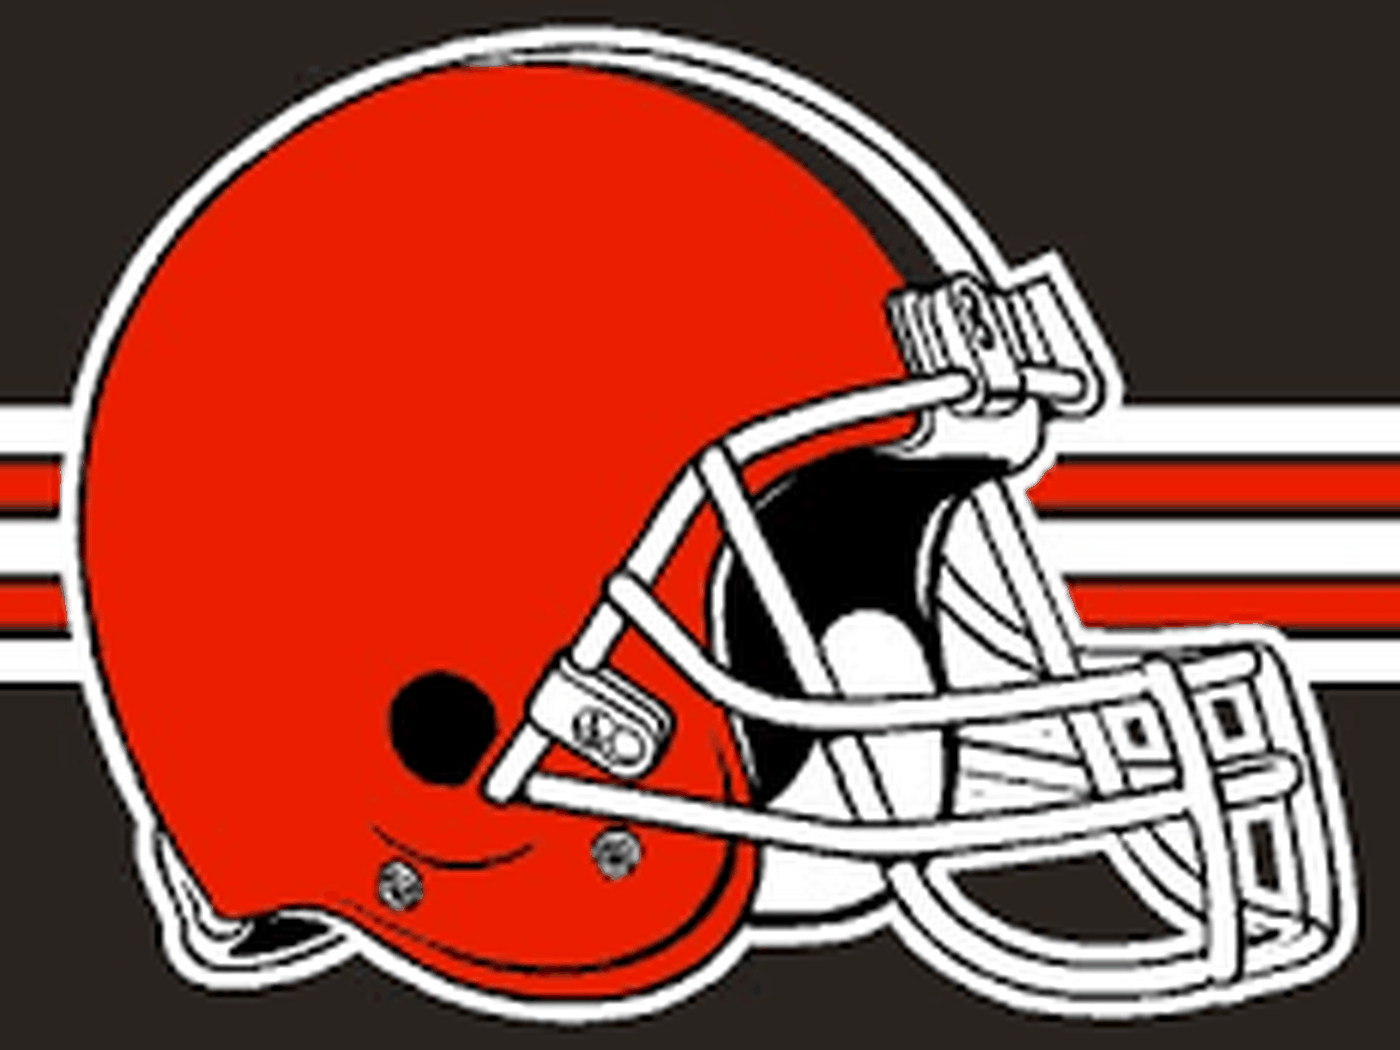 Cleveland Browns' Helmet History By Nature